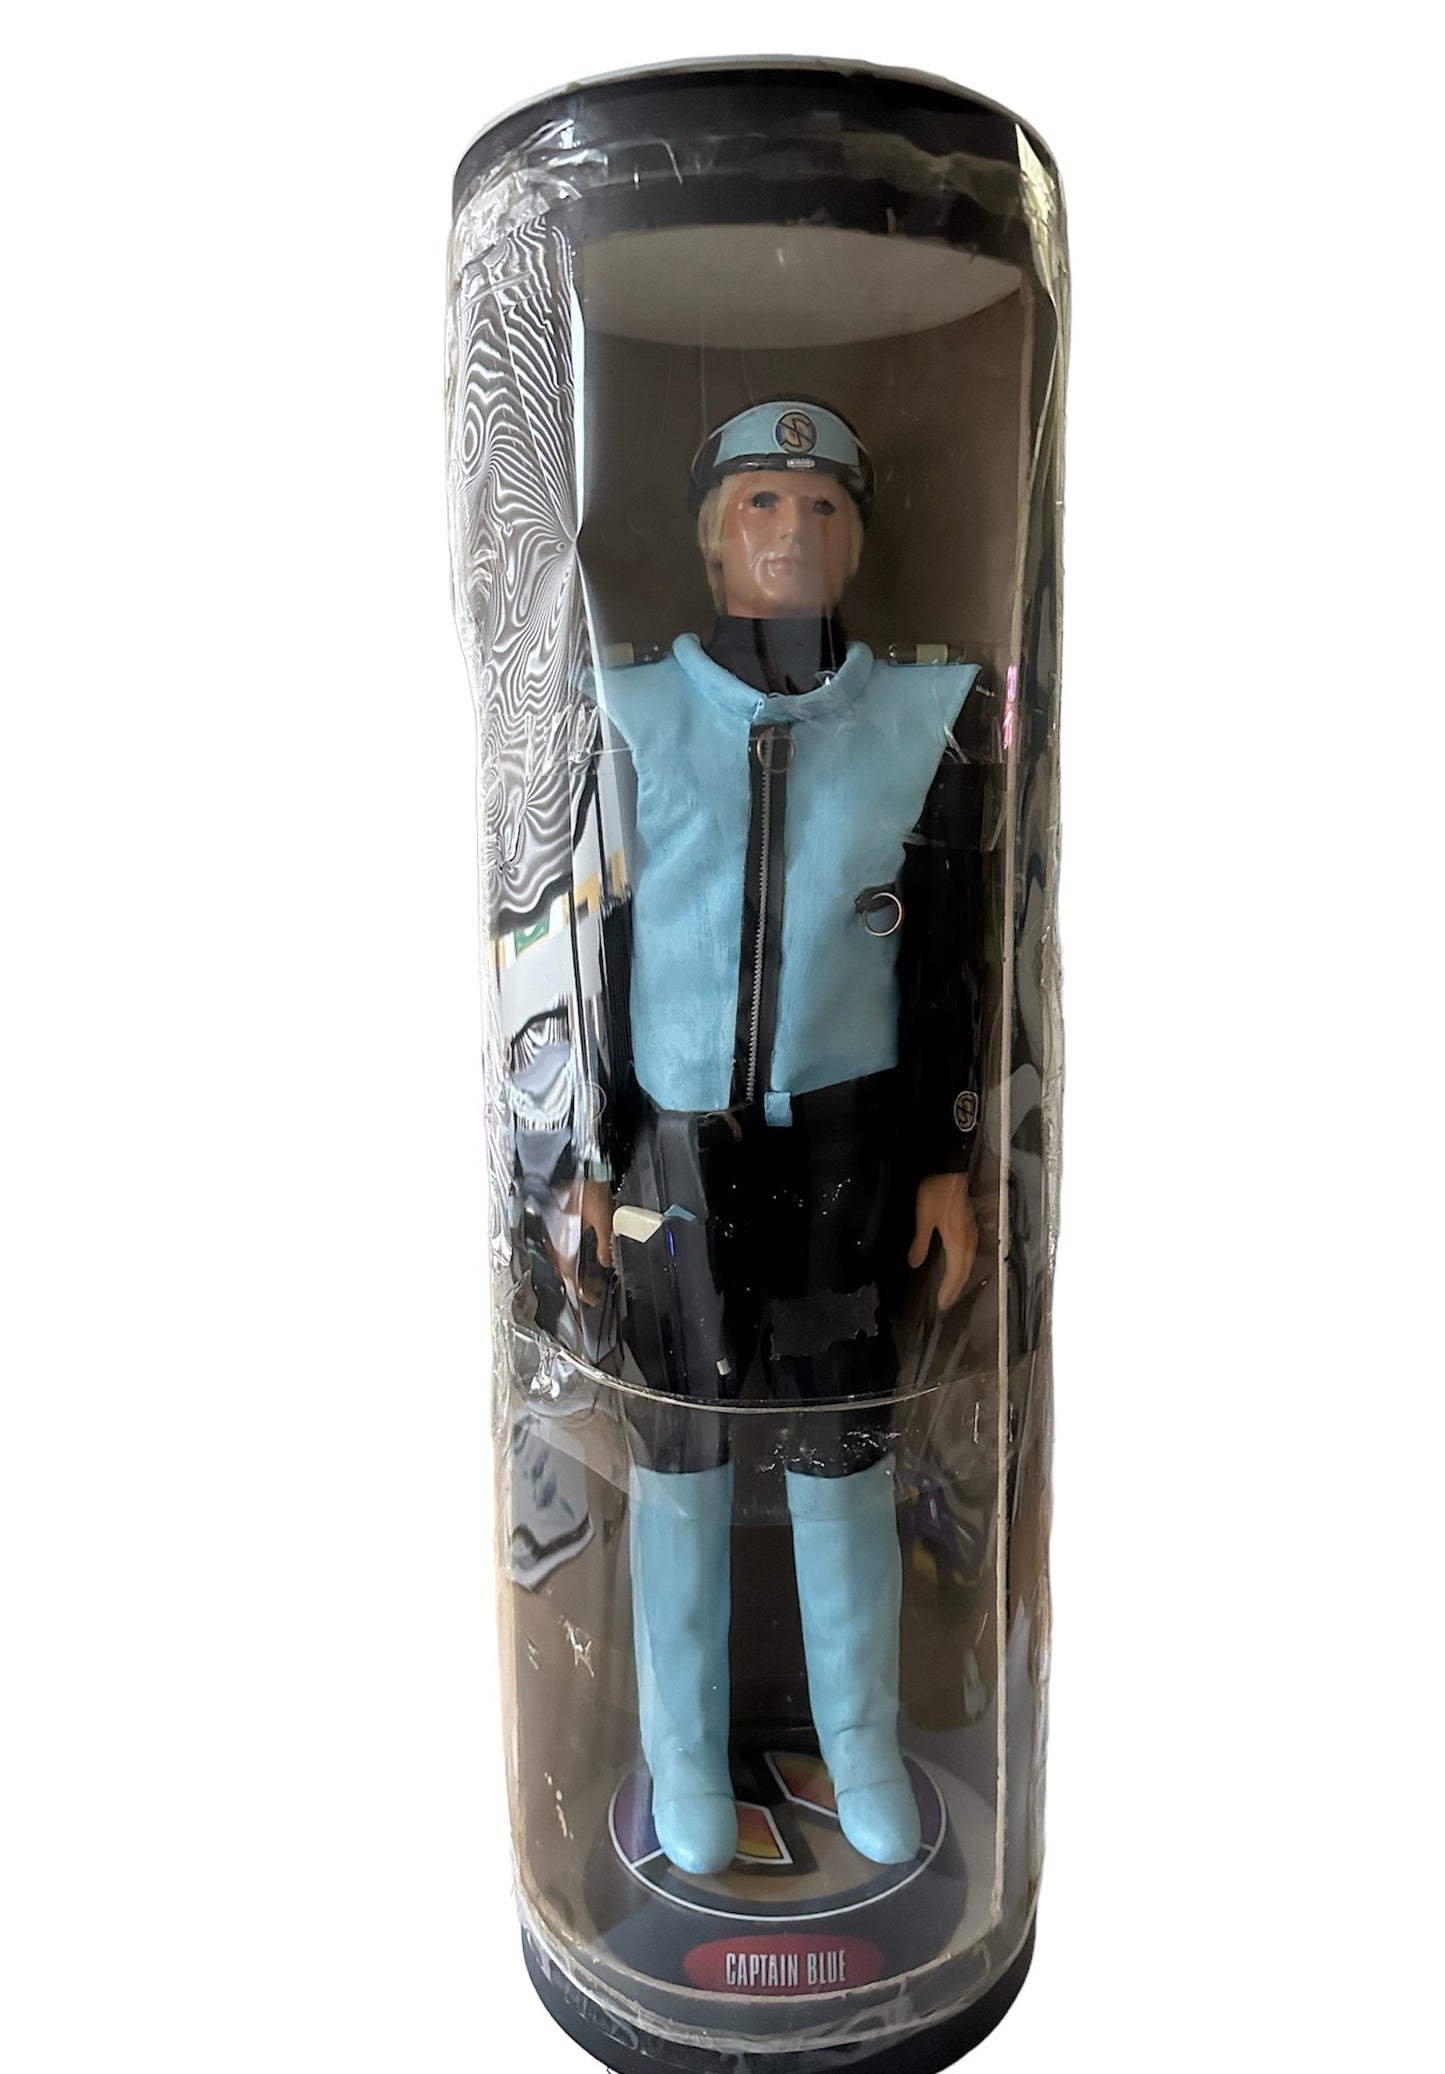 Vintage 2009 Iconic Replicas - Gerry Andersons Captain Scarlet - Captain Blue 1:1 Scale Display Replica Puppet - Limited Edition No. 73/100 With COA In Original Packing